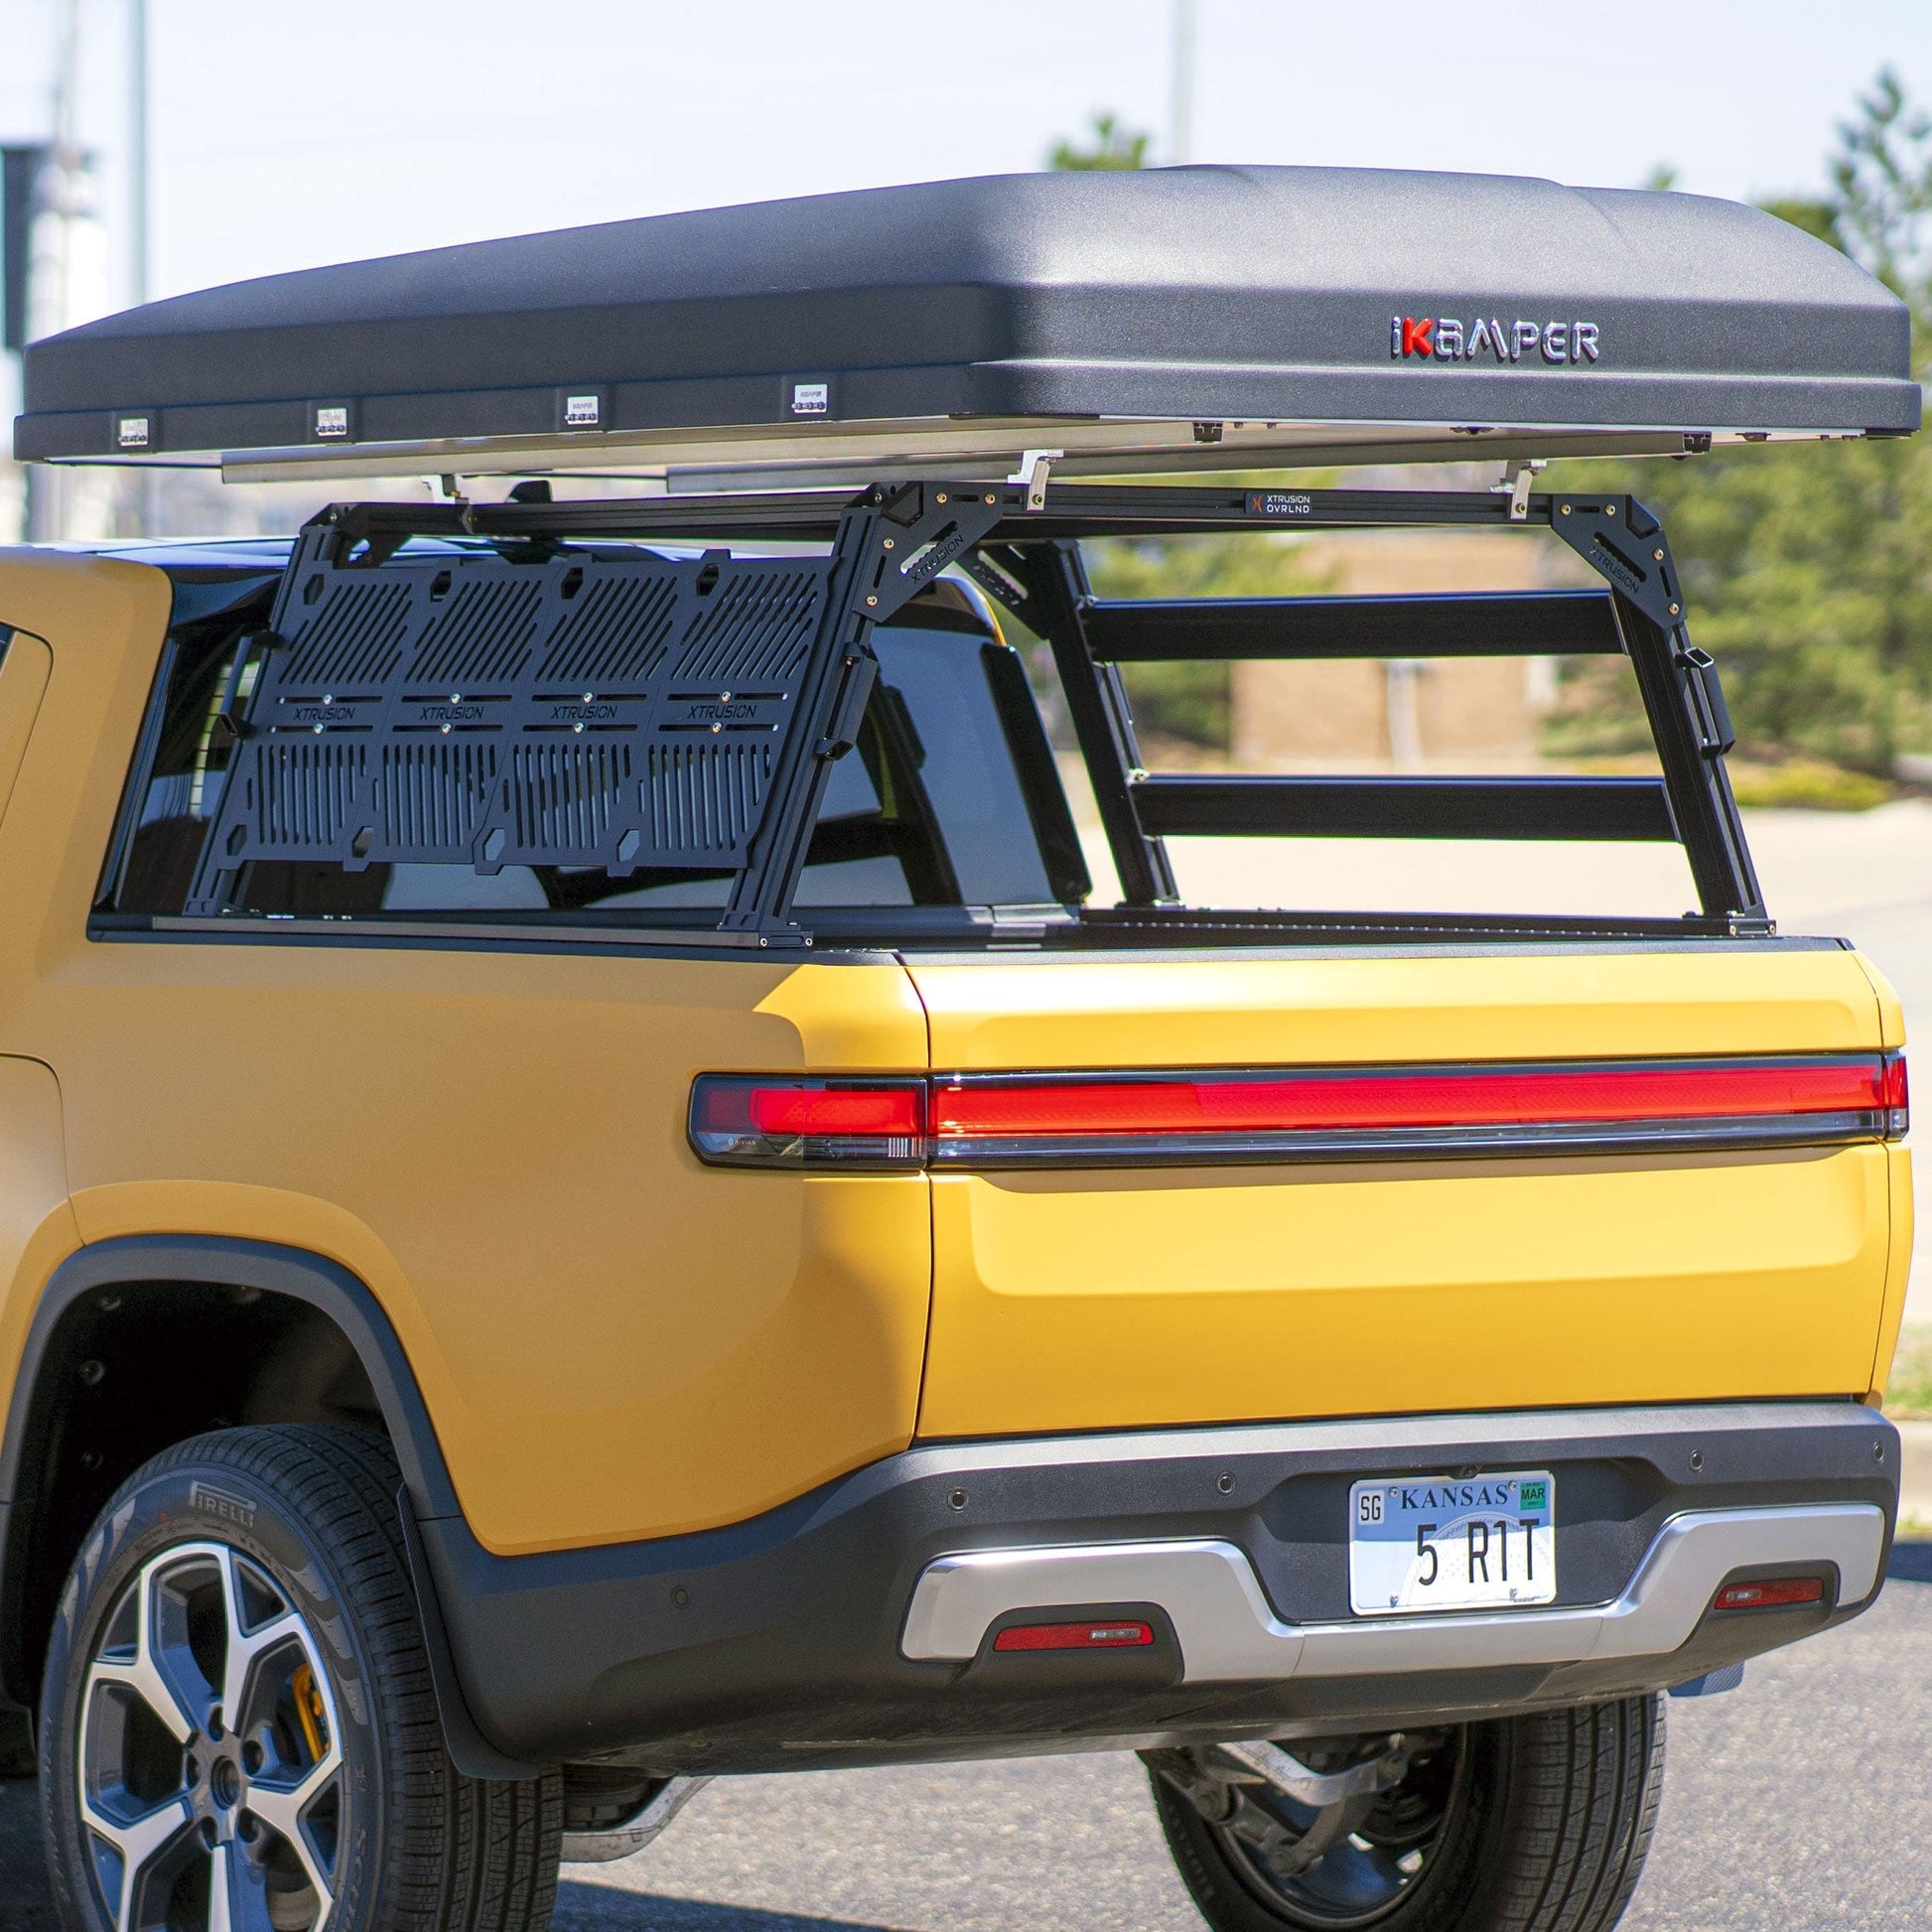 Xtrusion Overland XTR1 XTR1 Bed Rack for Rivian R1T